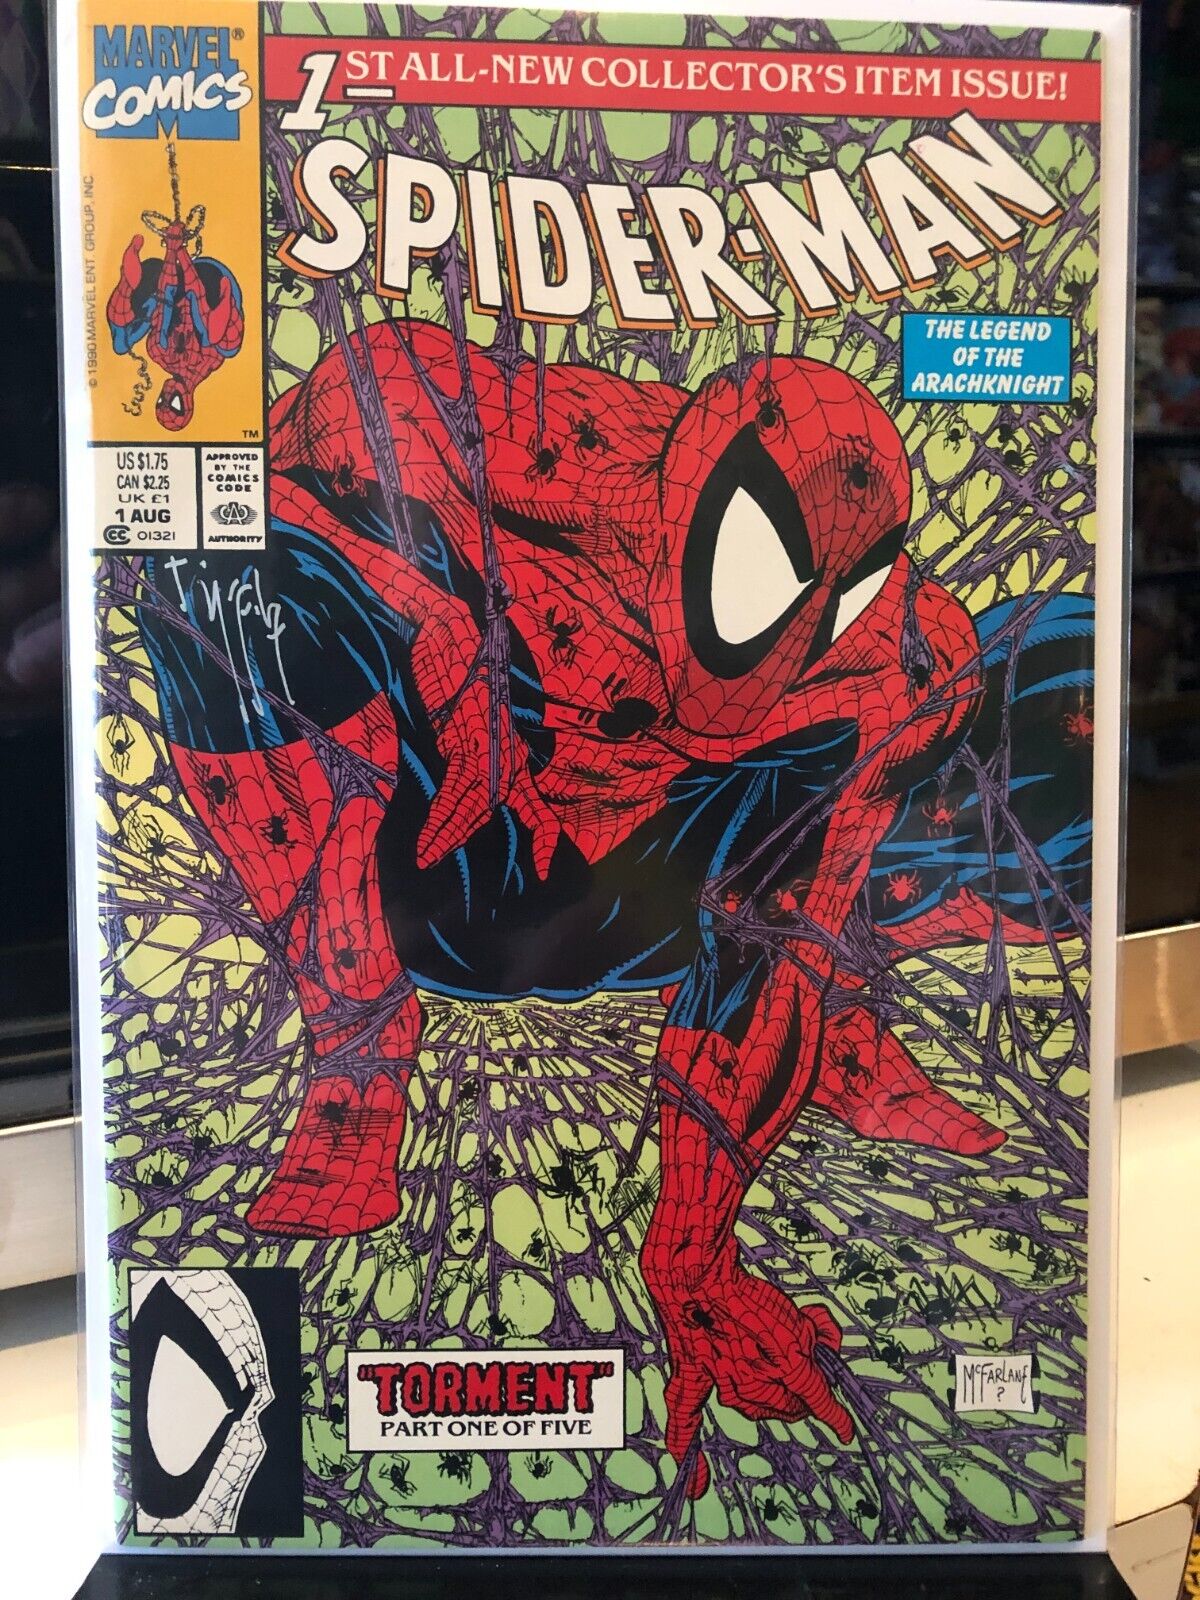 🔥RARE Spider's Web 1990 Ed Red Web-Stamped Spider-Man 1 SET Signed by McFarlane